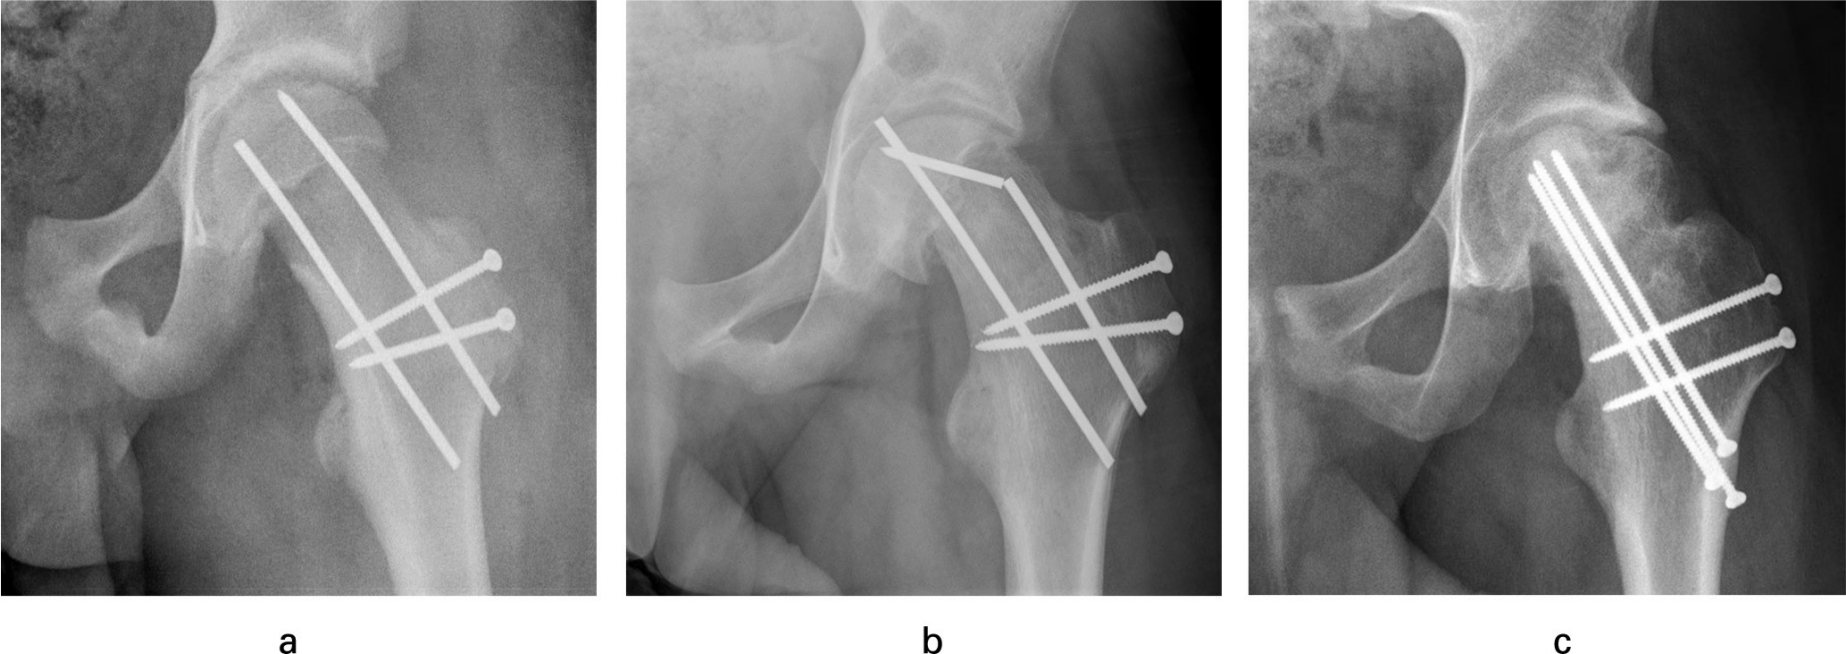 Fig. 3 
          a) Shows the postoperative result in a 13.3-year-old patient who presented with a mild SCFE. Stabilization was performed using only two threaded K-wires. b) At 12 weeks, secondary dislocation, implant fatigue failure and intra-articular protrusion of one K-wire occurred, needing revision surgery. c) Radiographic result at six years showing partial AVN and flattening of the lateral head segment. In addition, the adjacent acetabulum is sclerotic and flattened due to the remodeling process. Nevertheless, the outcome is good (mHHS 94, HOOS 97.5, MdA 16, UCLA 9).
        